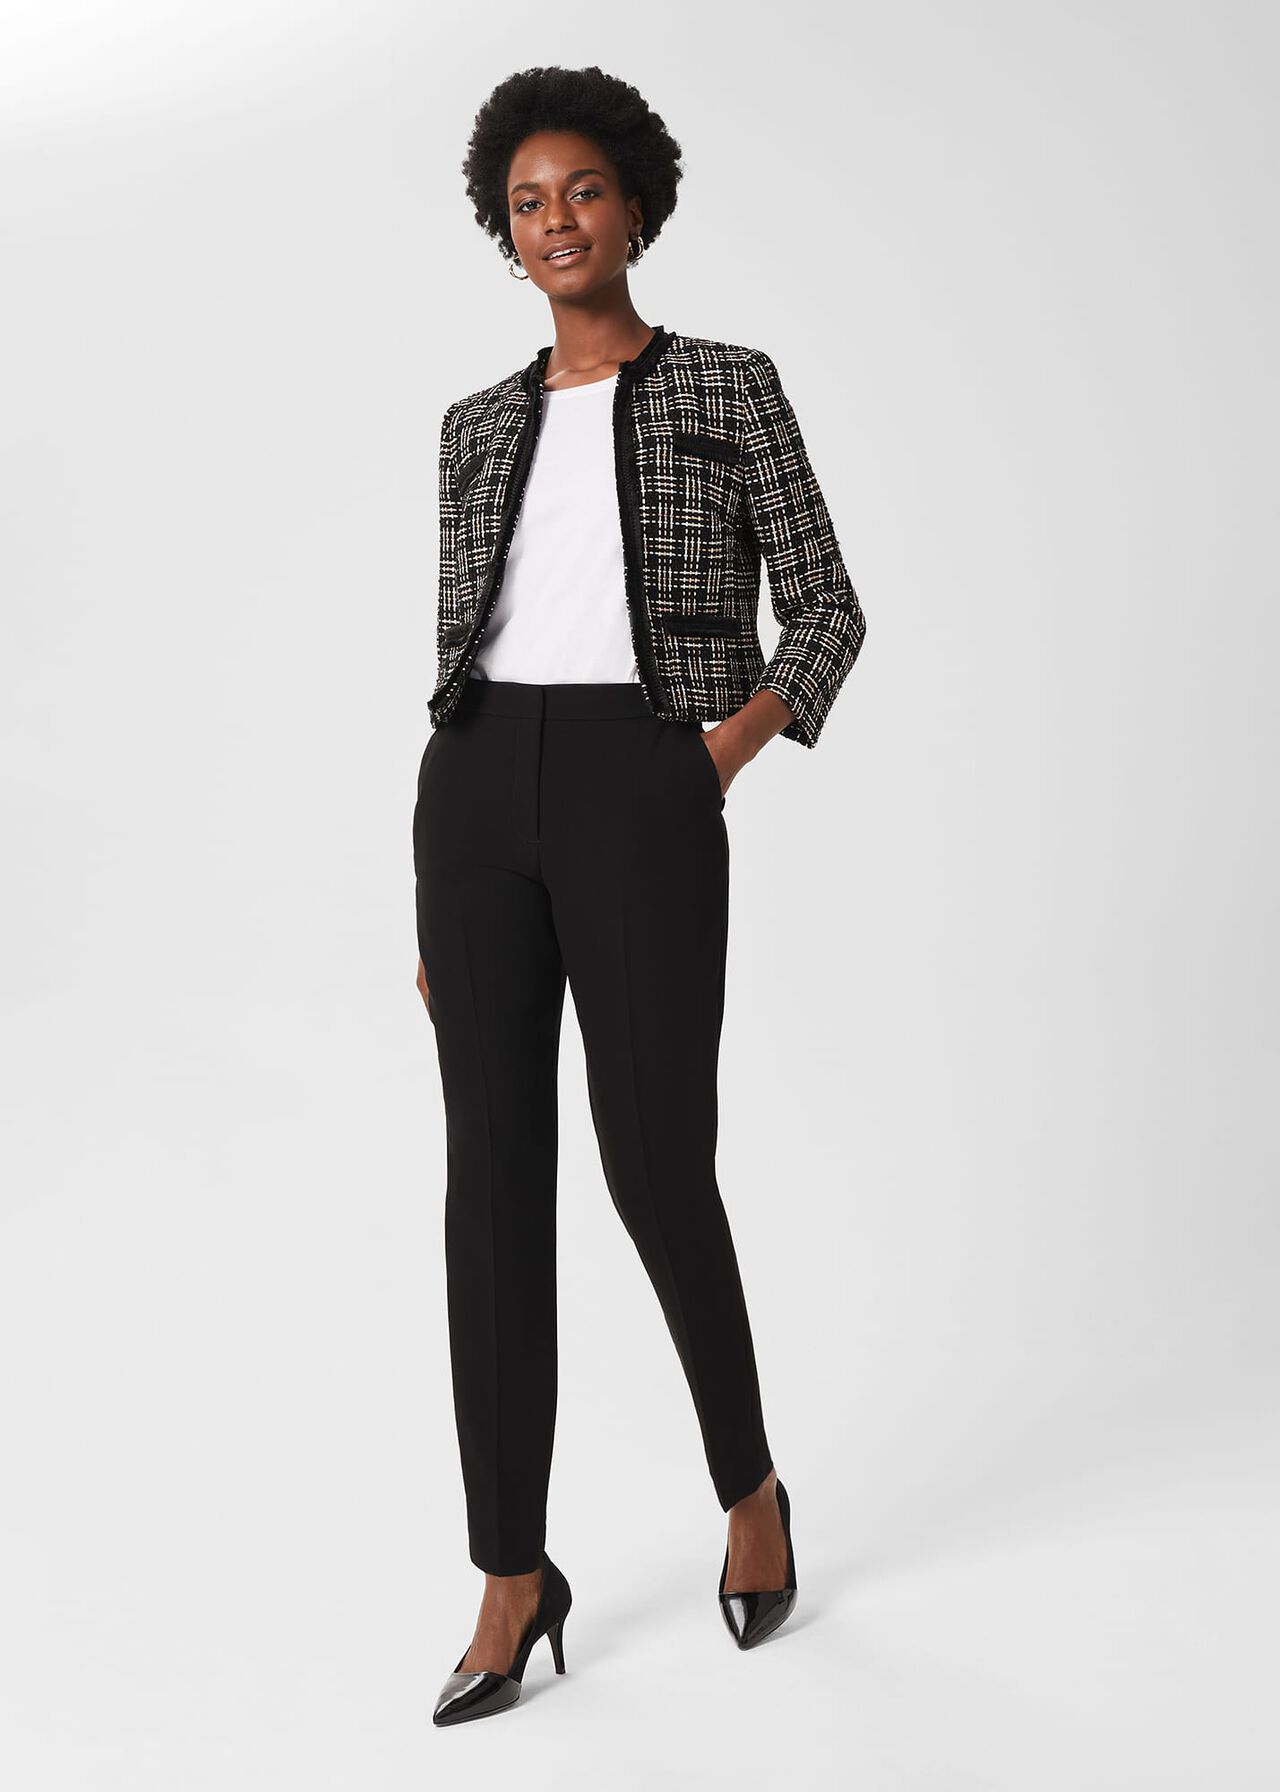 FSLE Tapered High Waisted Capris For Women Spring Next Petite Trouser Suits  Pants With 9 Point Casual Black Design Size 231117 From Yiwang05, $56.89